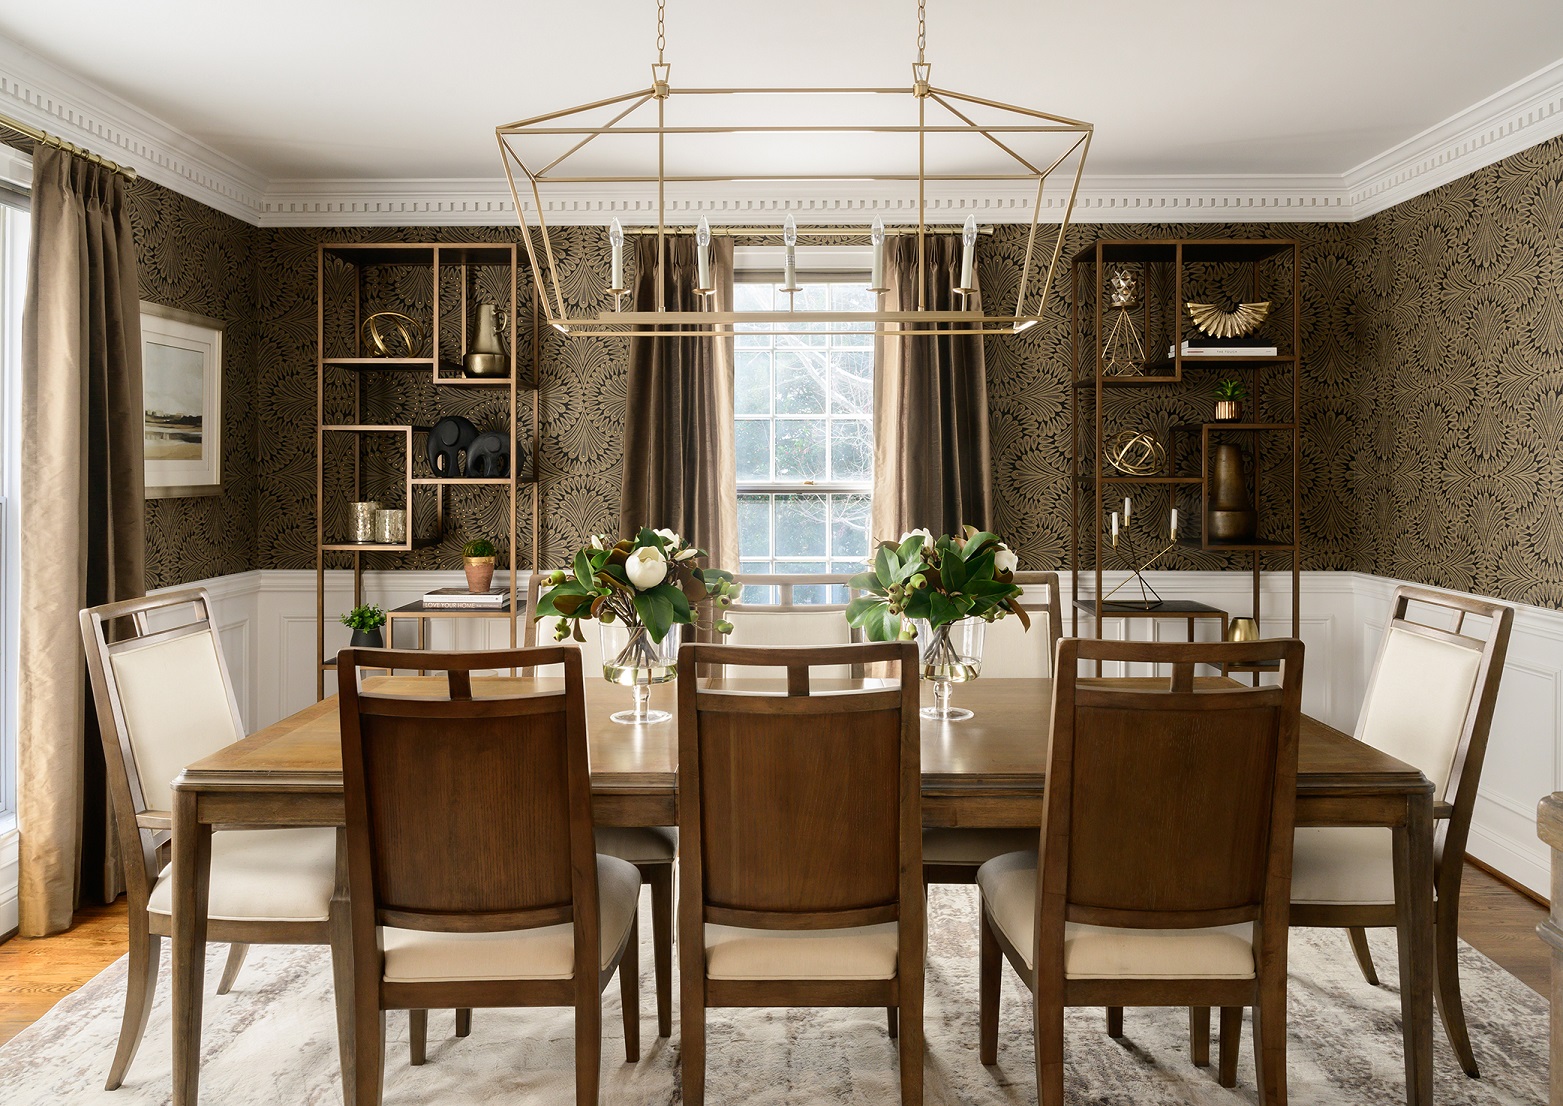 Classy dining room with bronze accents